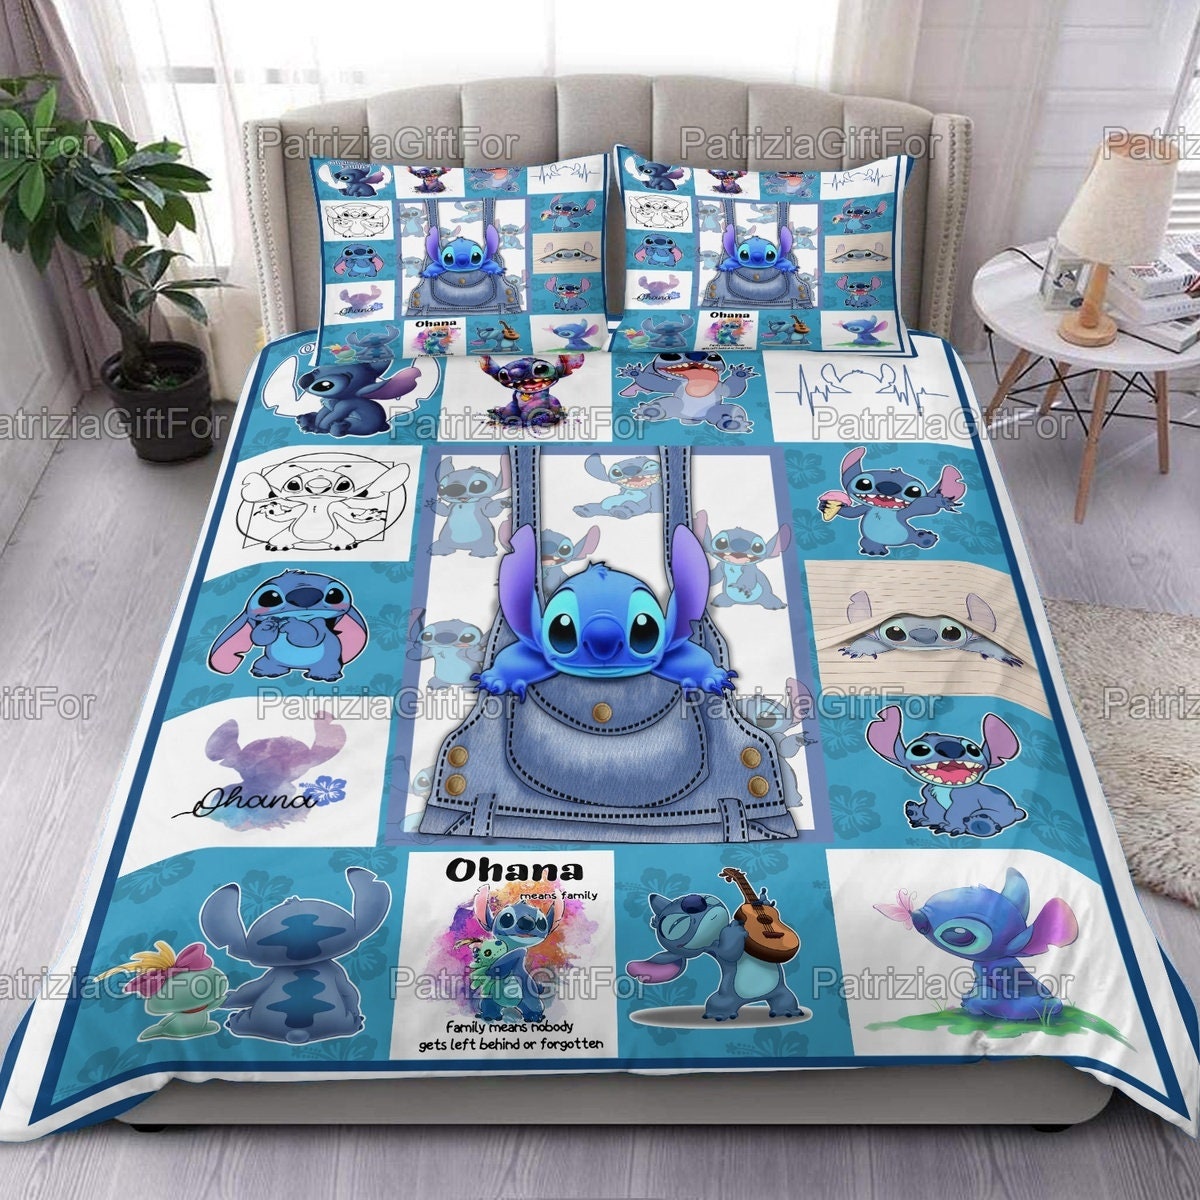 Stitch Collages Bedding Set Cute Home Bedroom Decor, Gift For Stitch Lovers